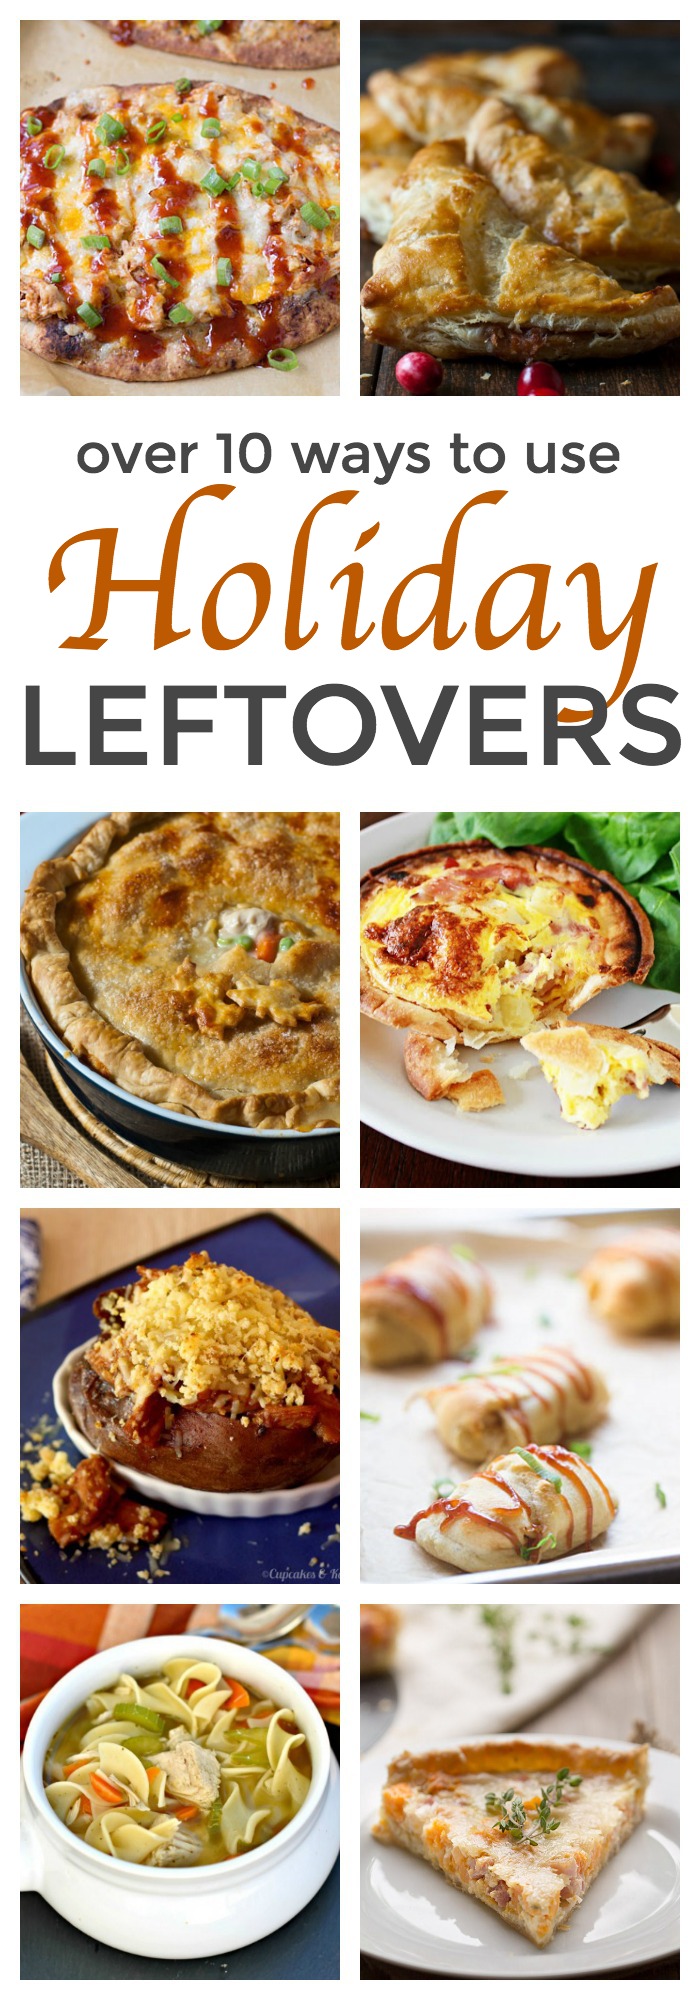 Over 10 Ways To Use Holiday Leftovers | This Gal Cooks #recipes